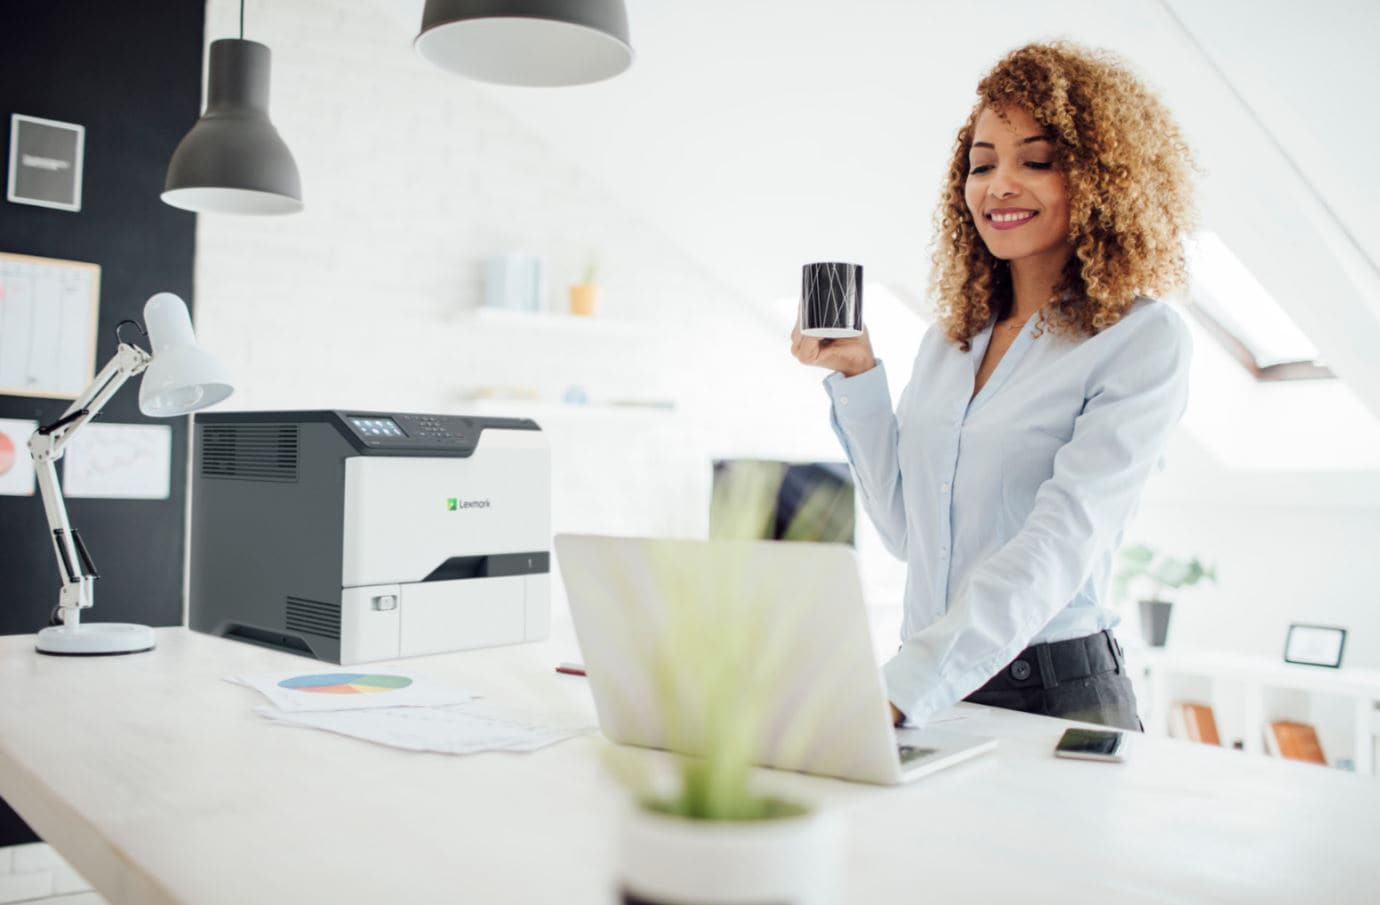 Why You Should Add a Multifunction Printer to Your WFH Technology